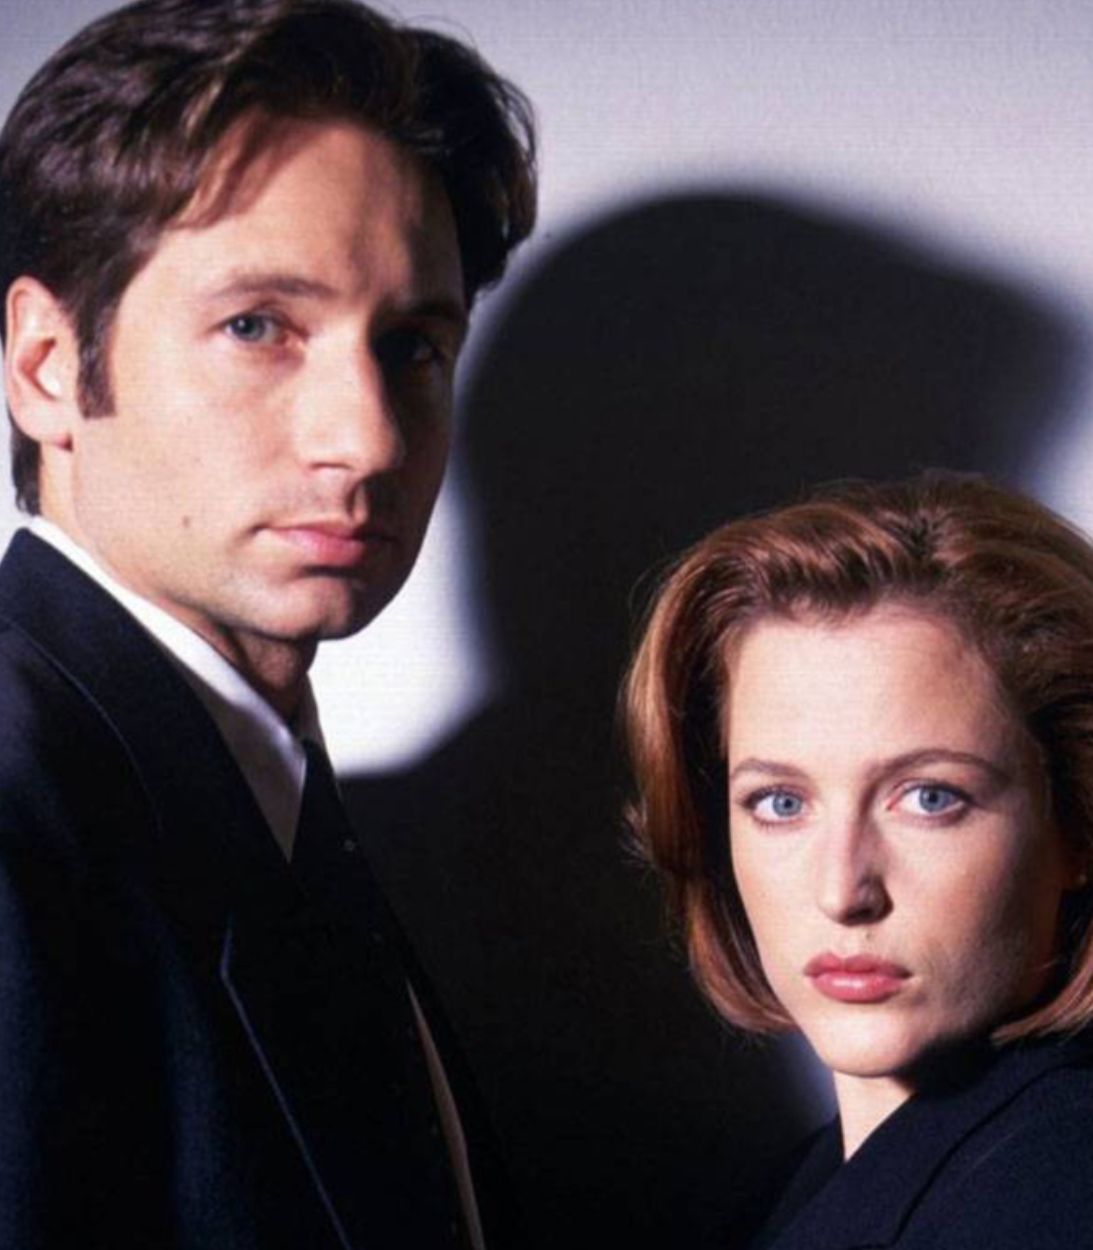 The X-Files vertical